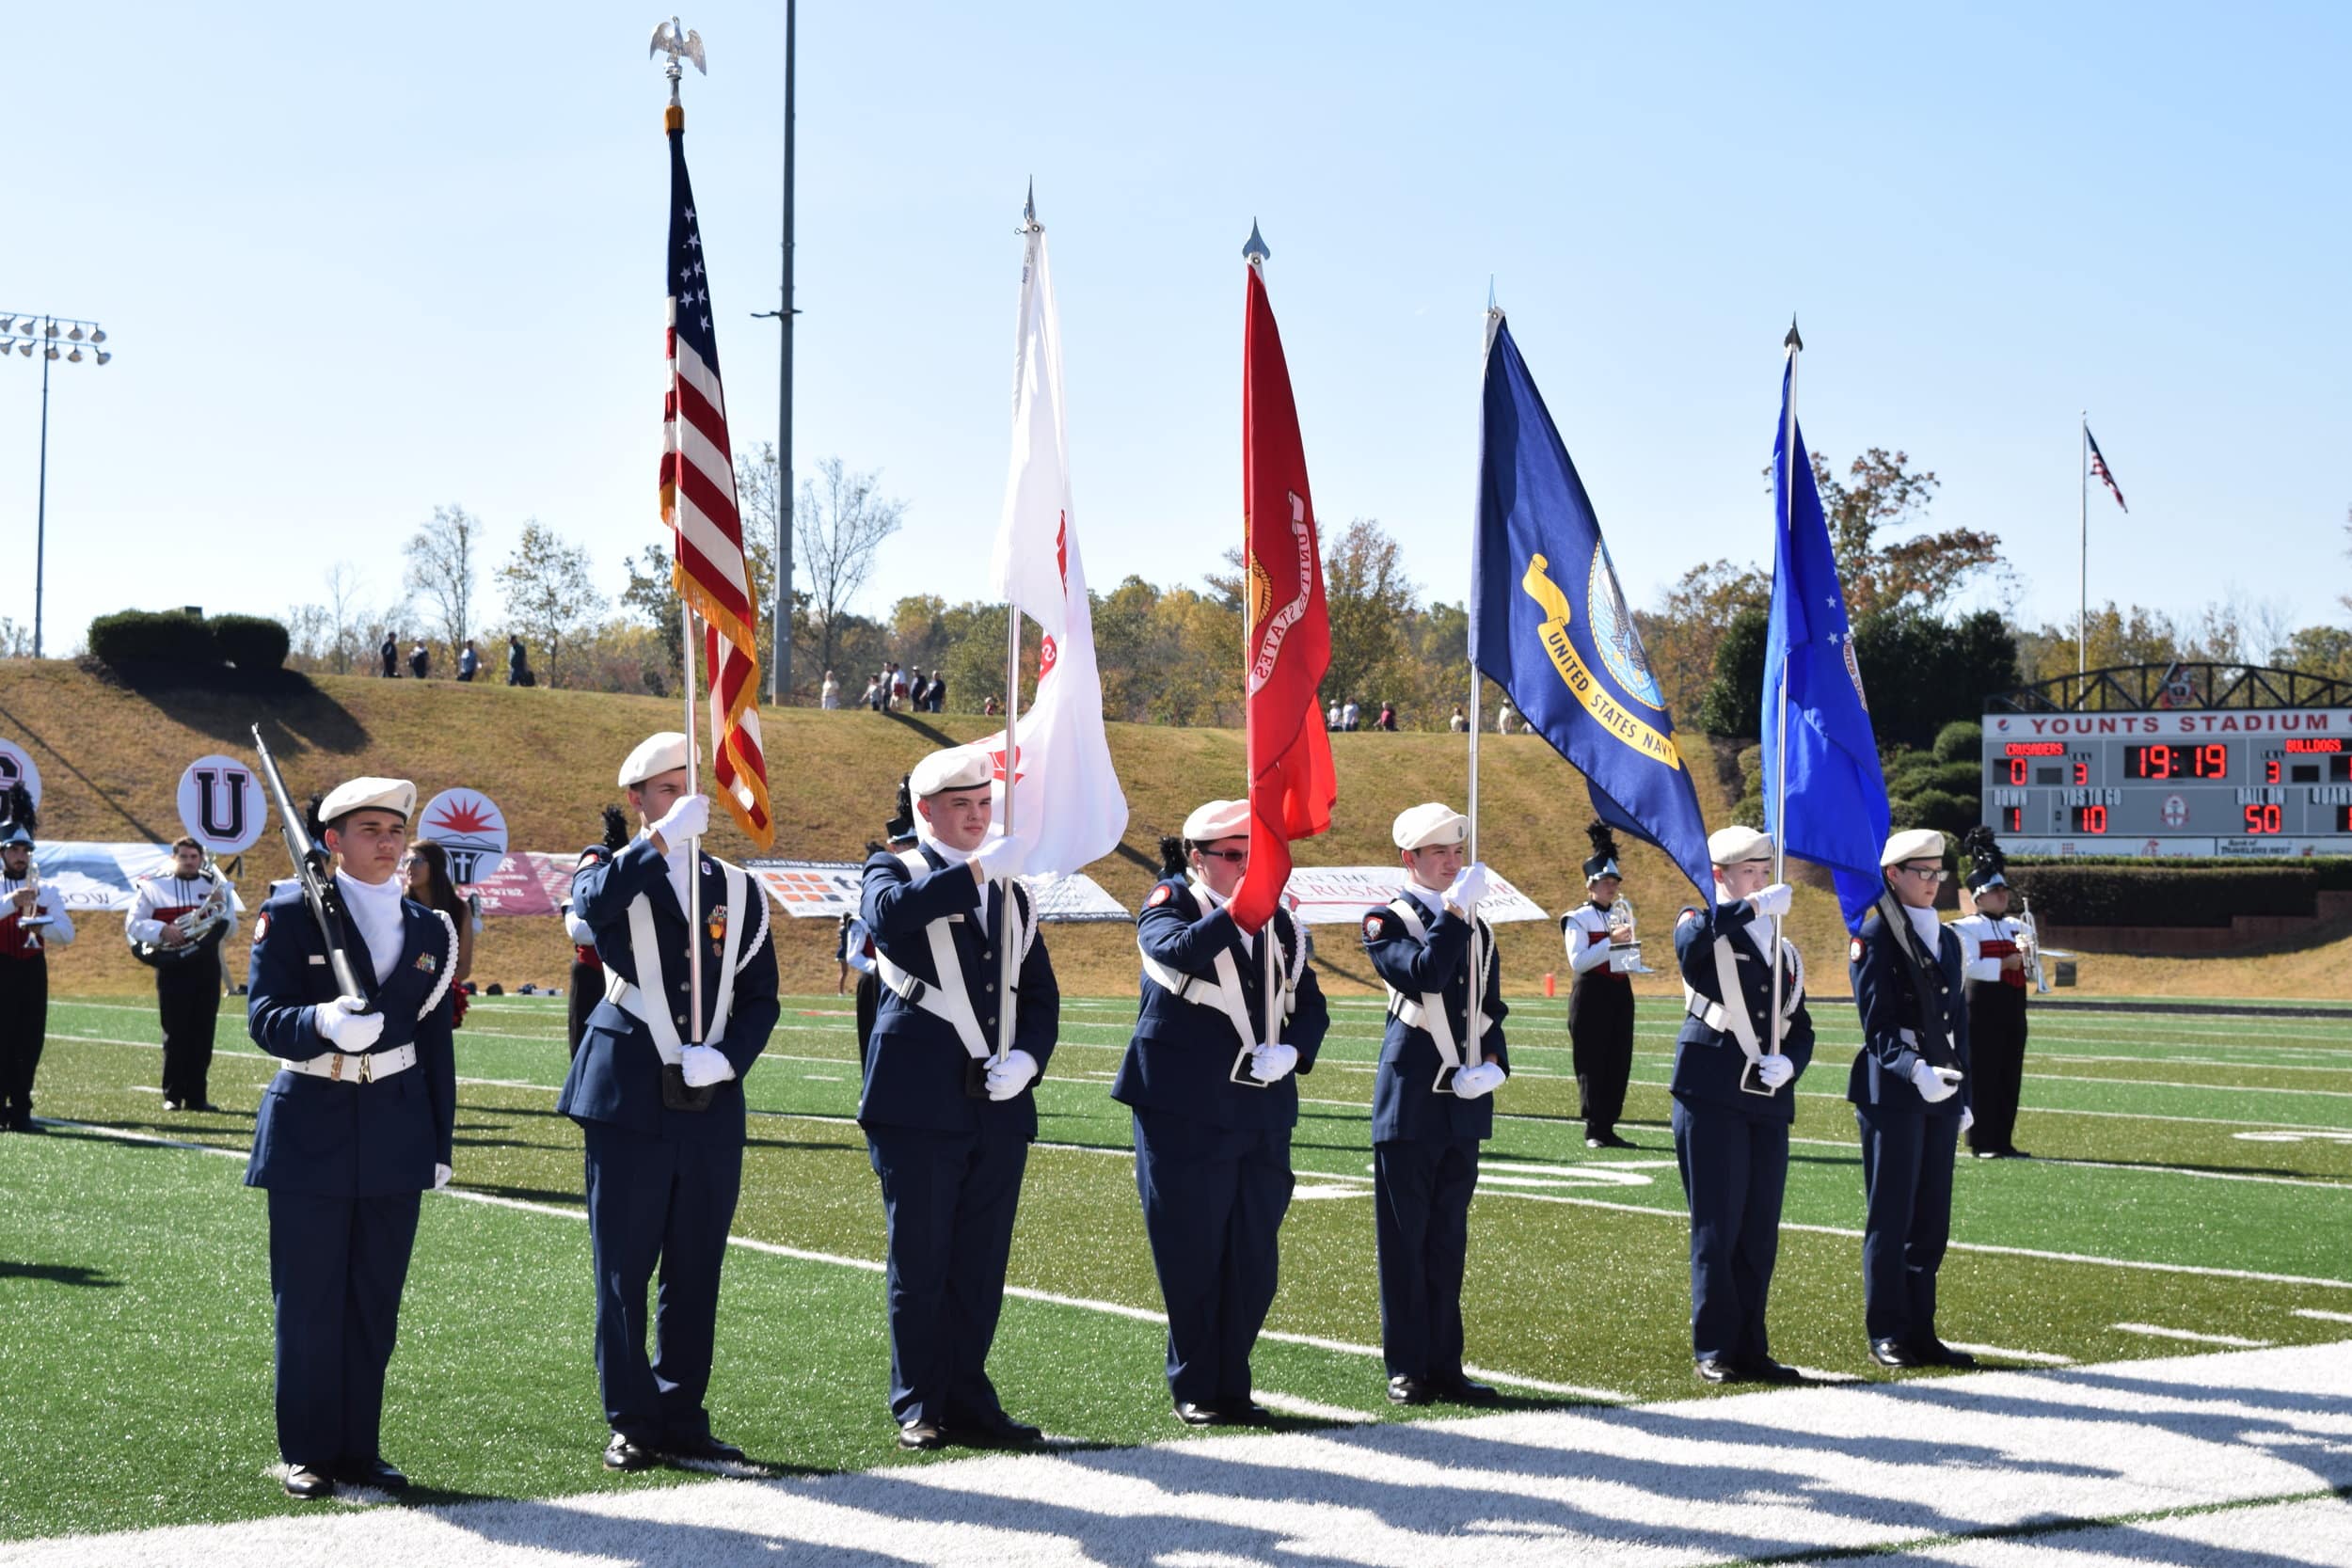 A local high school color guard presents the flags before kick-off.